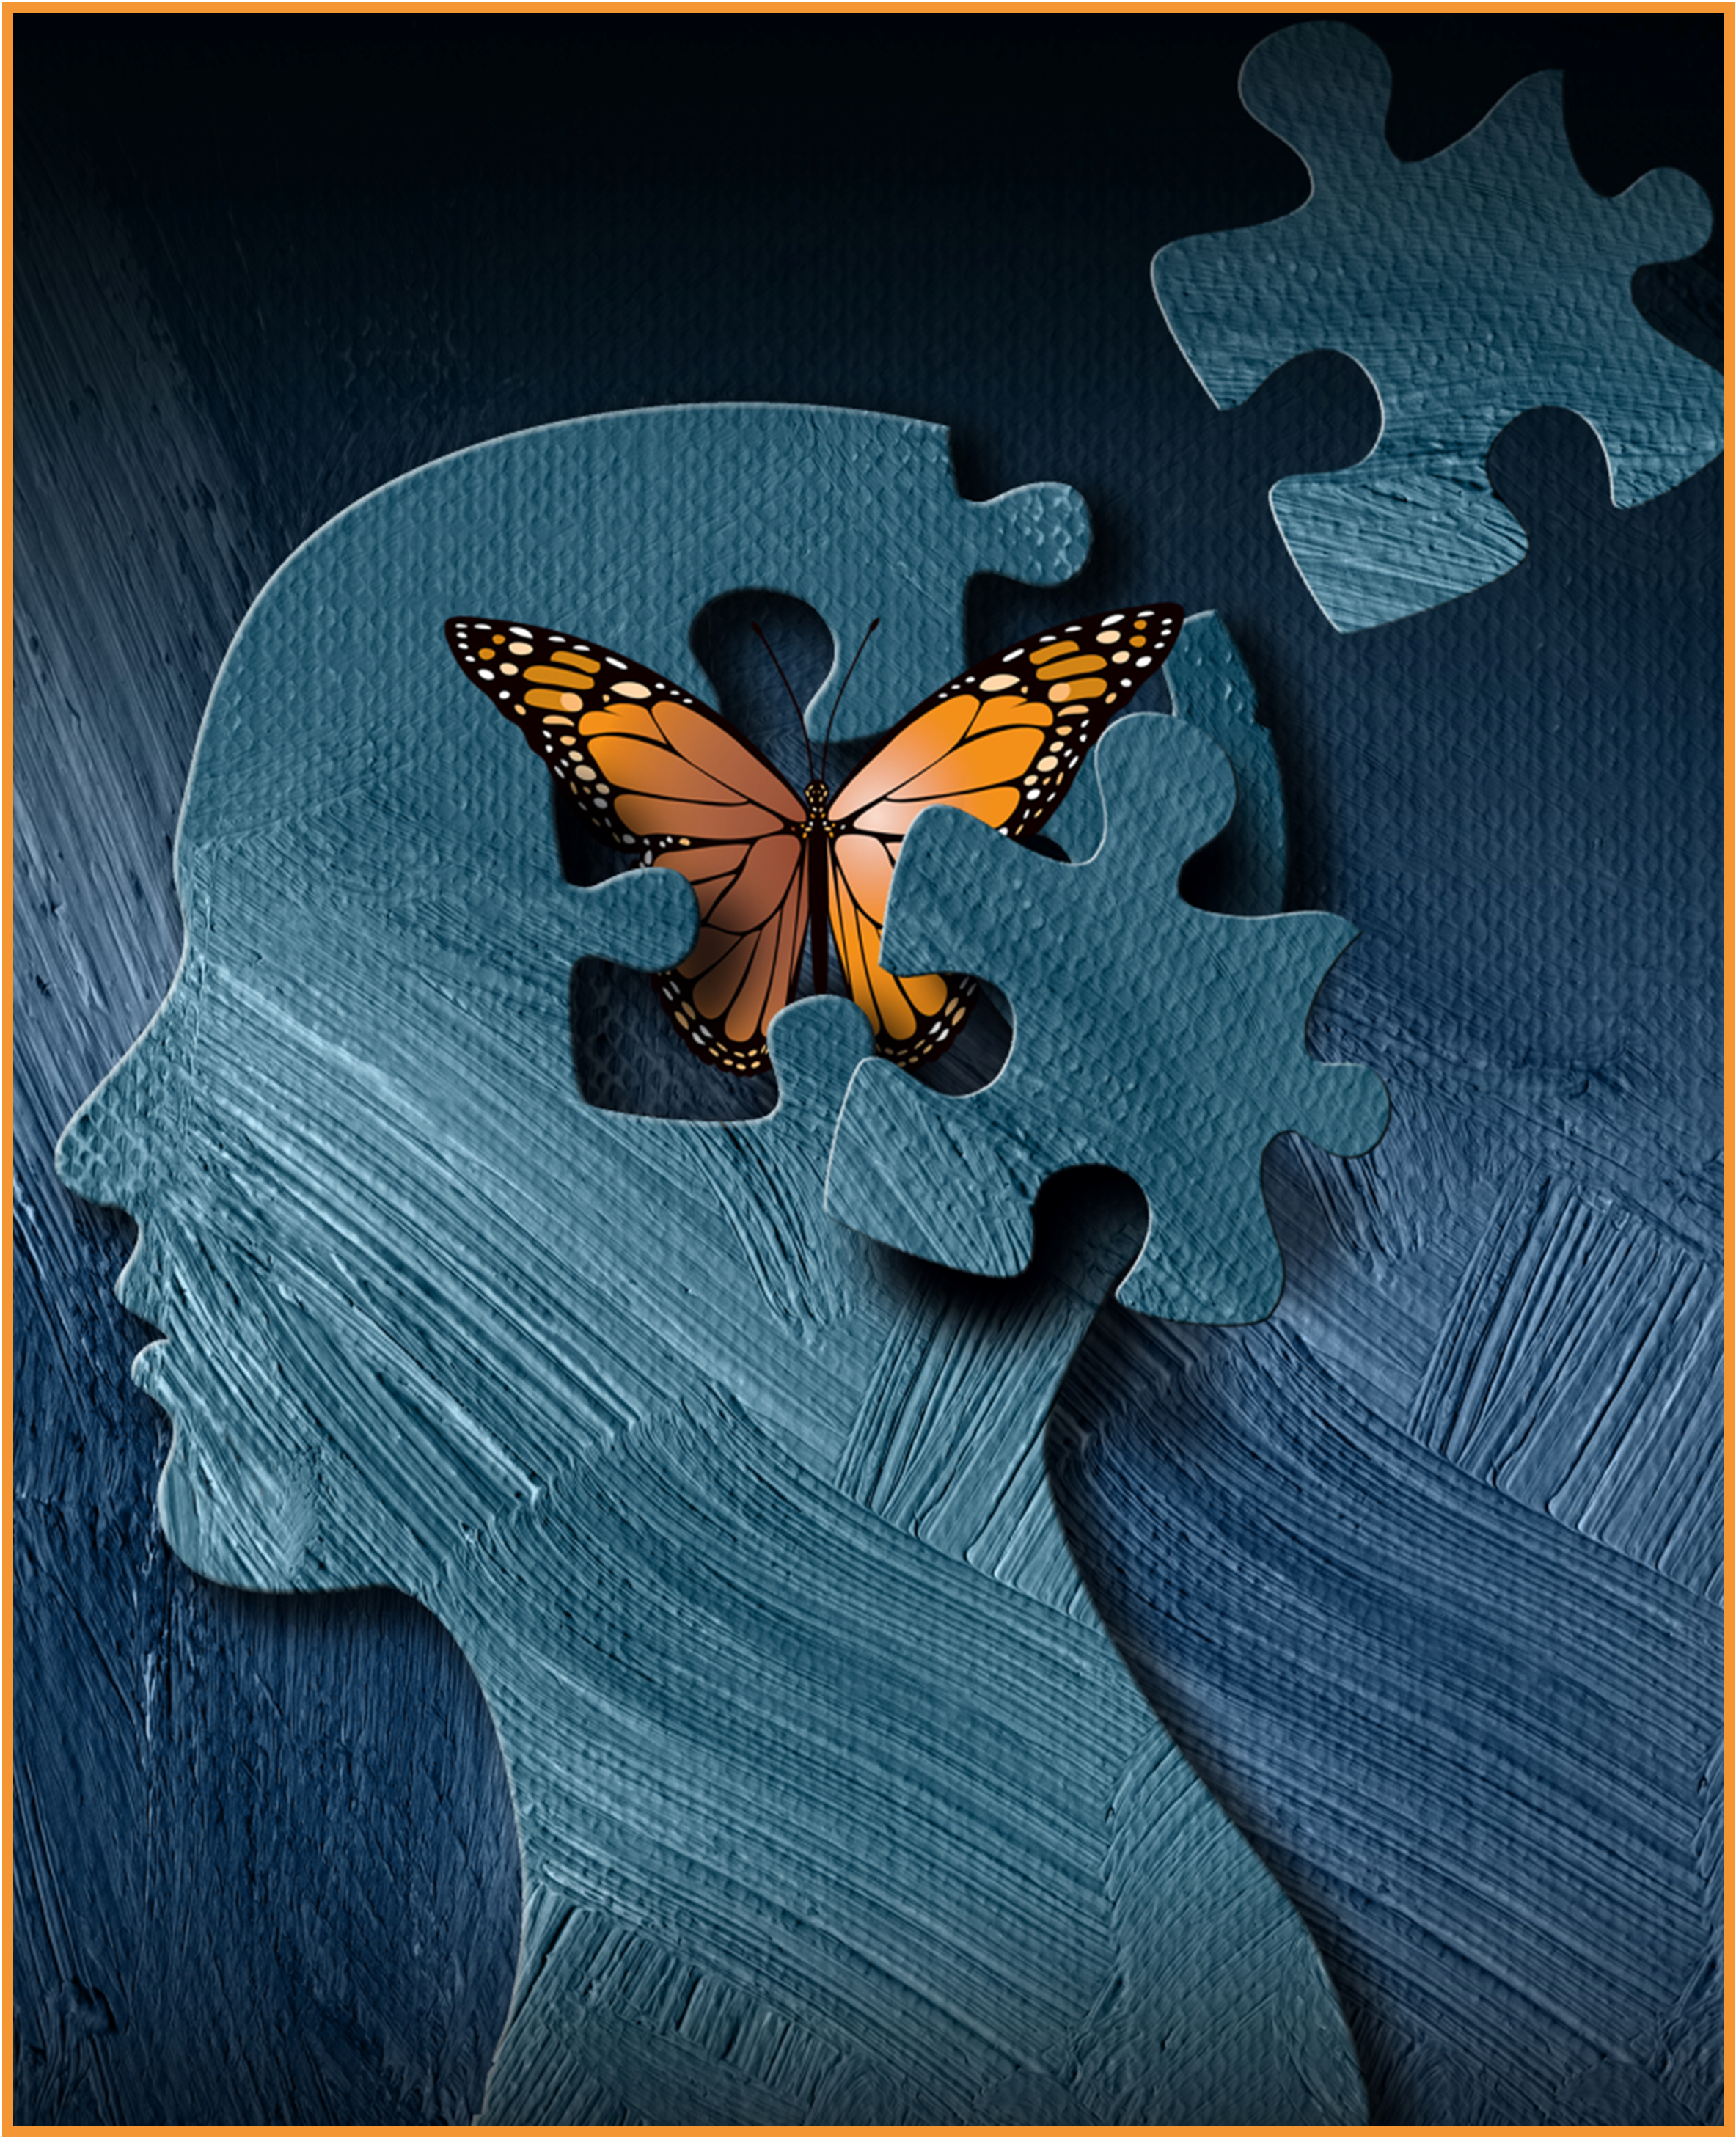 Image of person's head with a butterfly and puzzle pieces